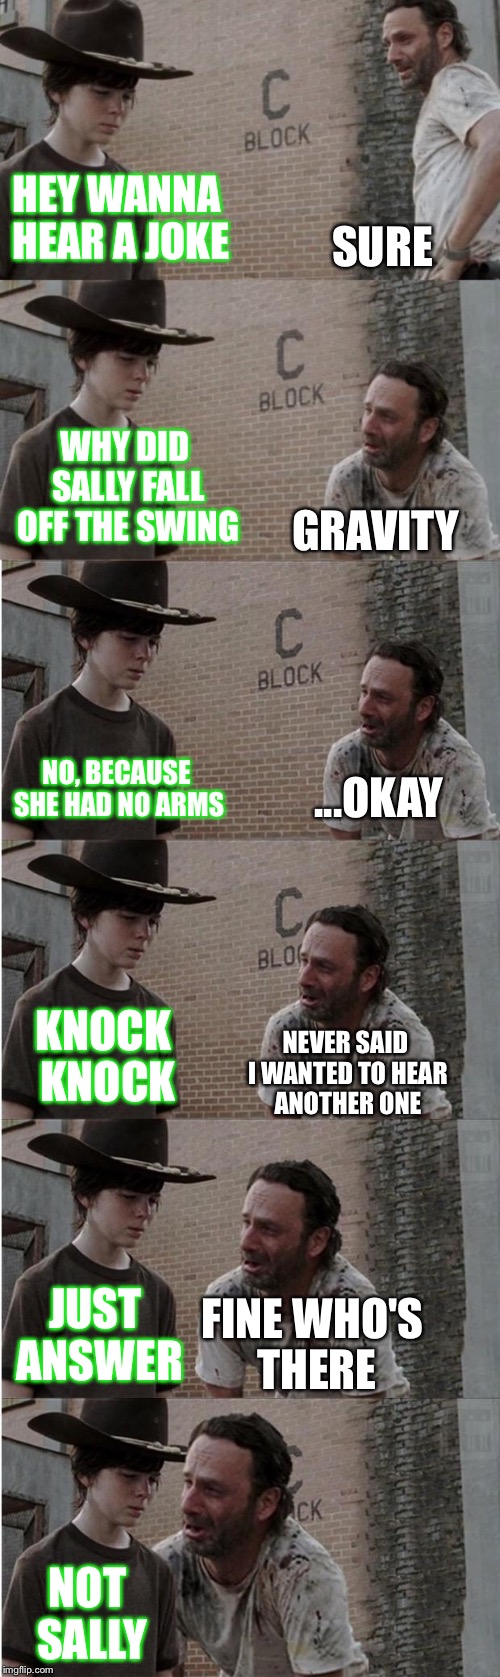 Rick and Carl Longer Meme | HEY WANNA HEAR A JOKE; SURE; WHY DID SALLY FALL OFF THE SWING; GRAVITY; NO, BECAUSE SHE HAD NO ARMS; ...OKAY; KNOCK KNOCK; NEVER SAID I WANTED TO HEAR ANOTHER ONE; JUST ANSWER; FINE WHO'S THERE; NOT SALLY | image tagged in memes,rick and carl longer | made w/ Imgflip meme maker